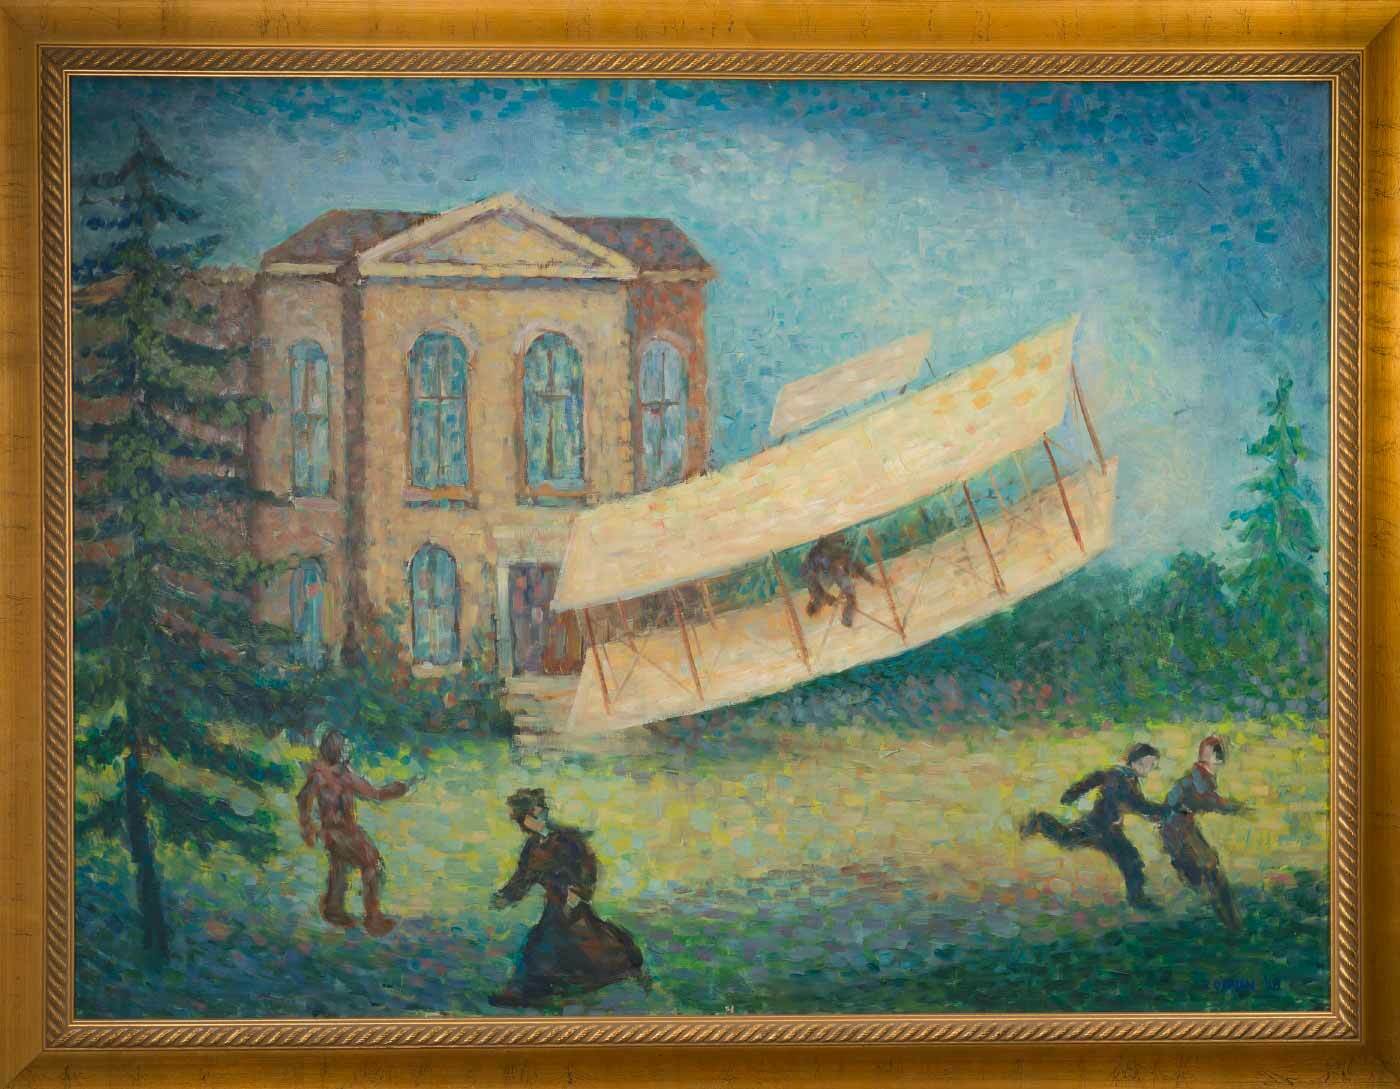 A painting of an glider plane flying in front of a building with people runny away from it.